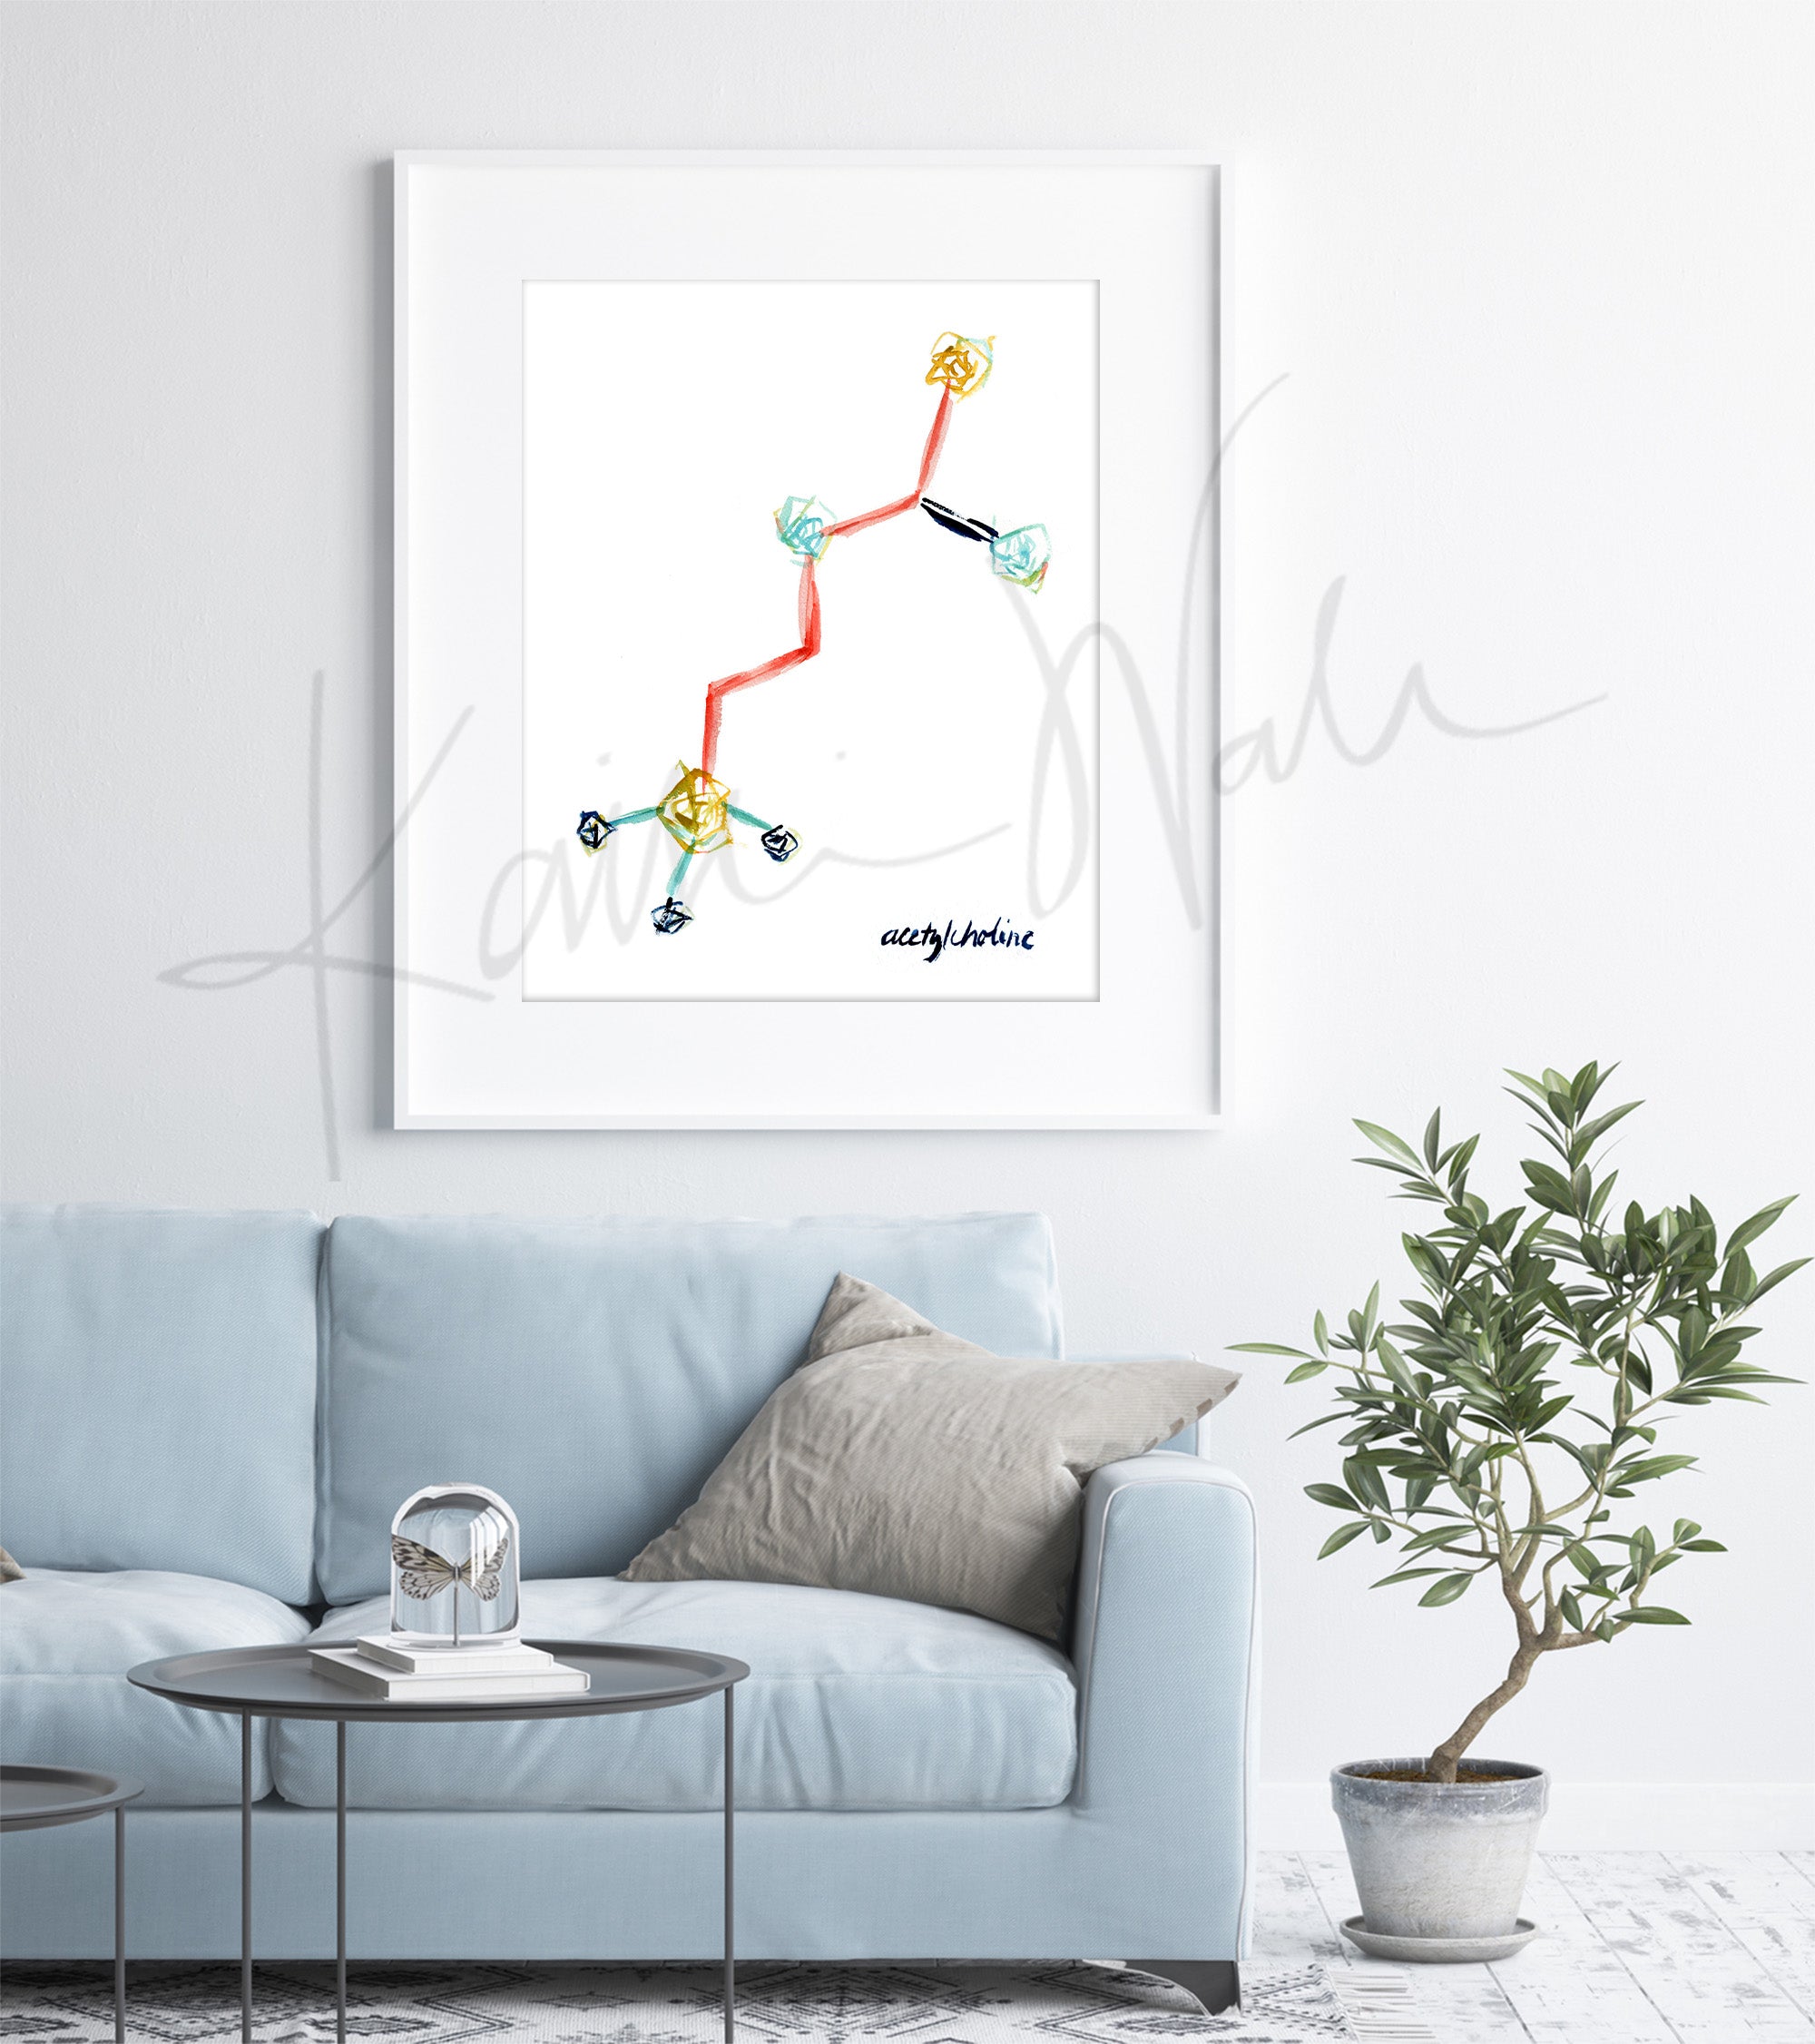 Framed watercolor painting of the acetylcholine structure in blues, yellow and reds. The painting is hanging over a blue couch.